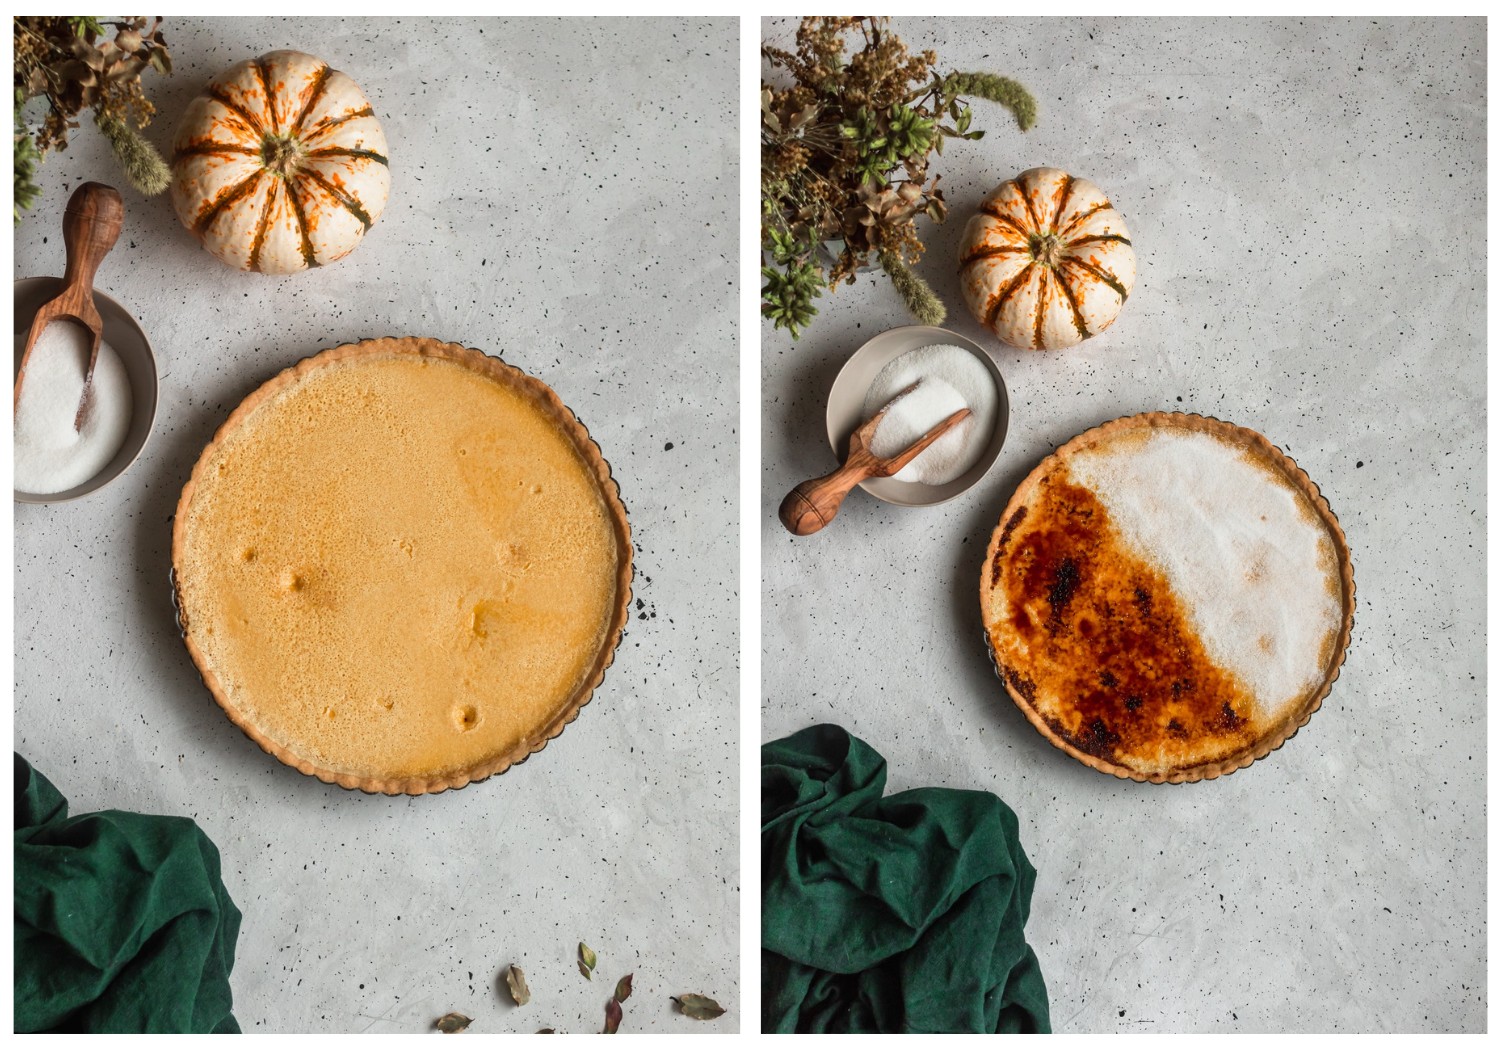 Two images of a creme brulee tart. On the left, a baked custard tart is placed on a grey background. On the right, the tart is sprinkled with sugar and halfway caramelized.